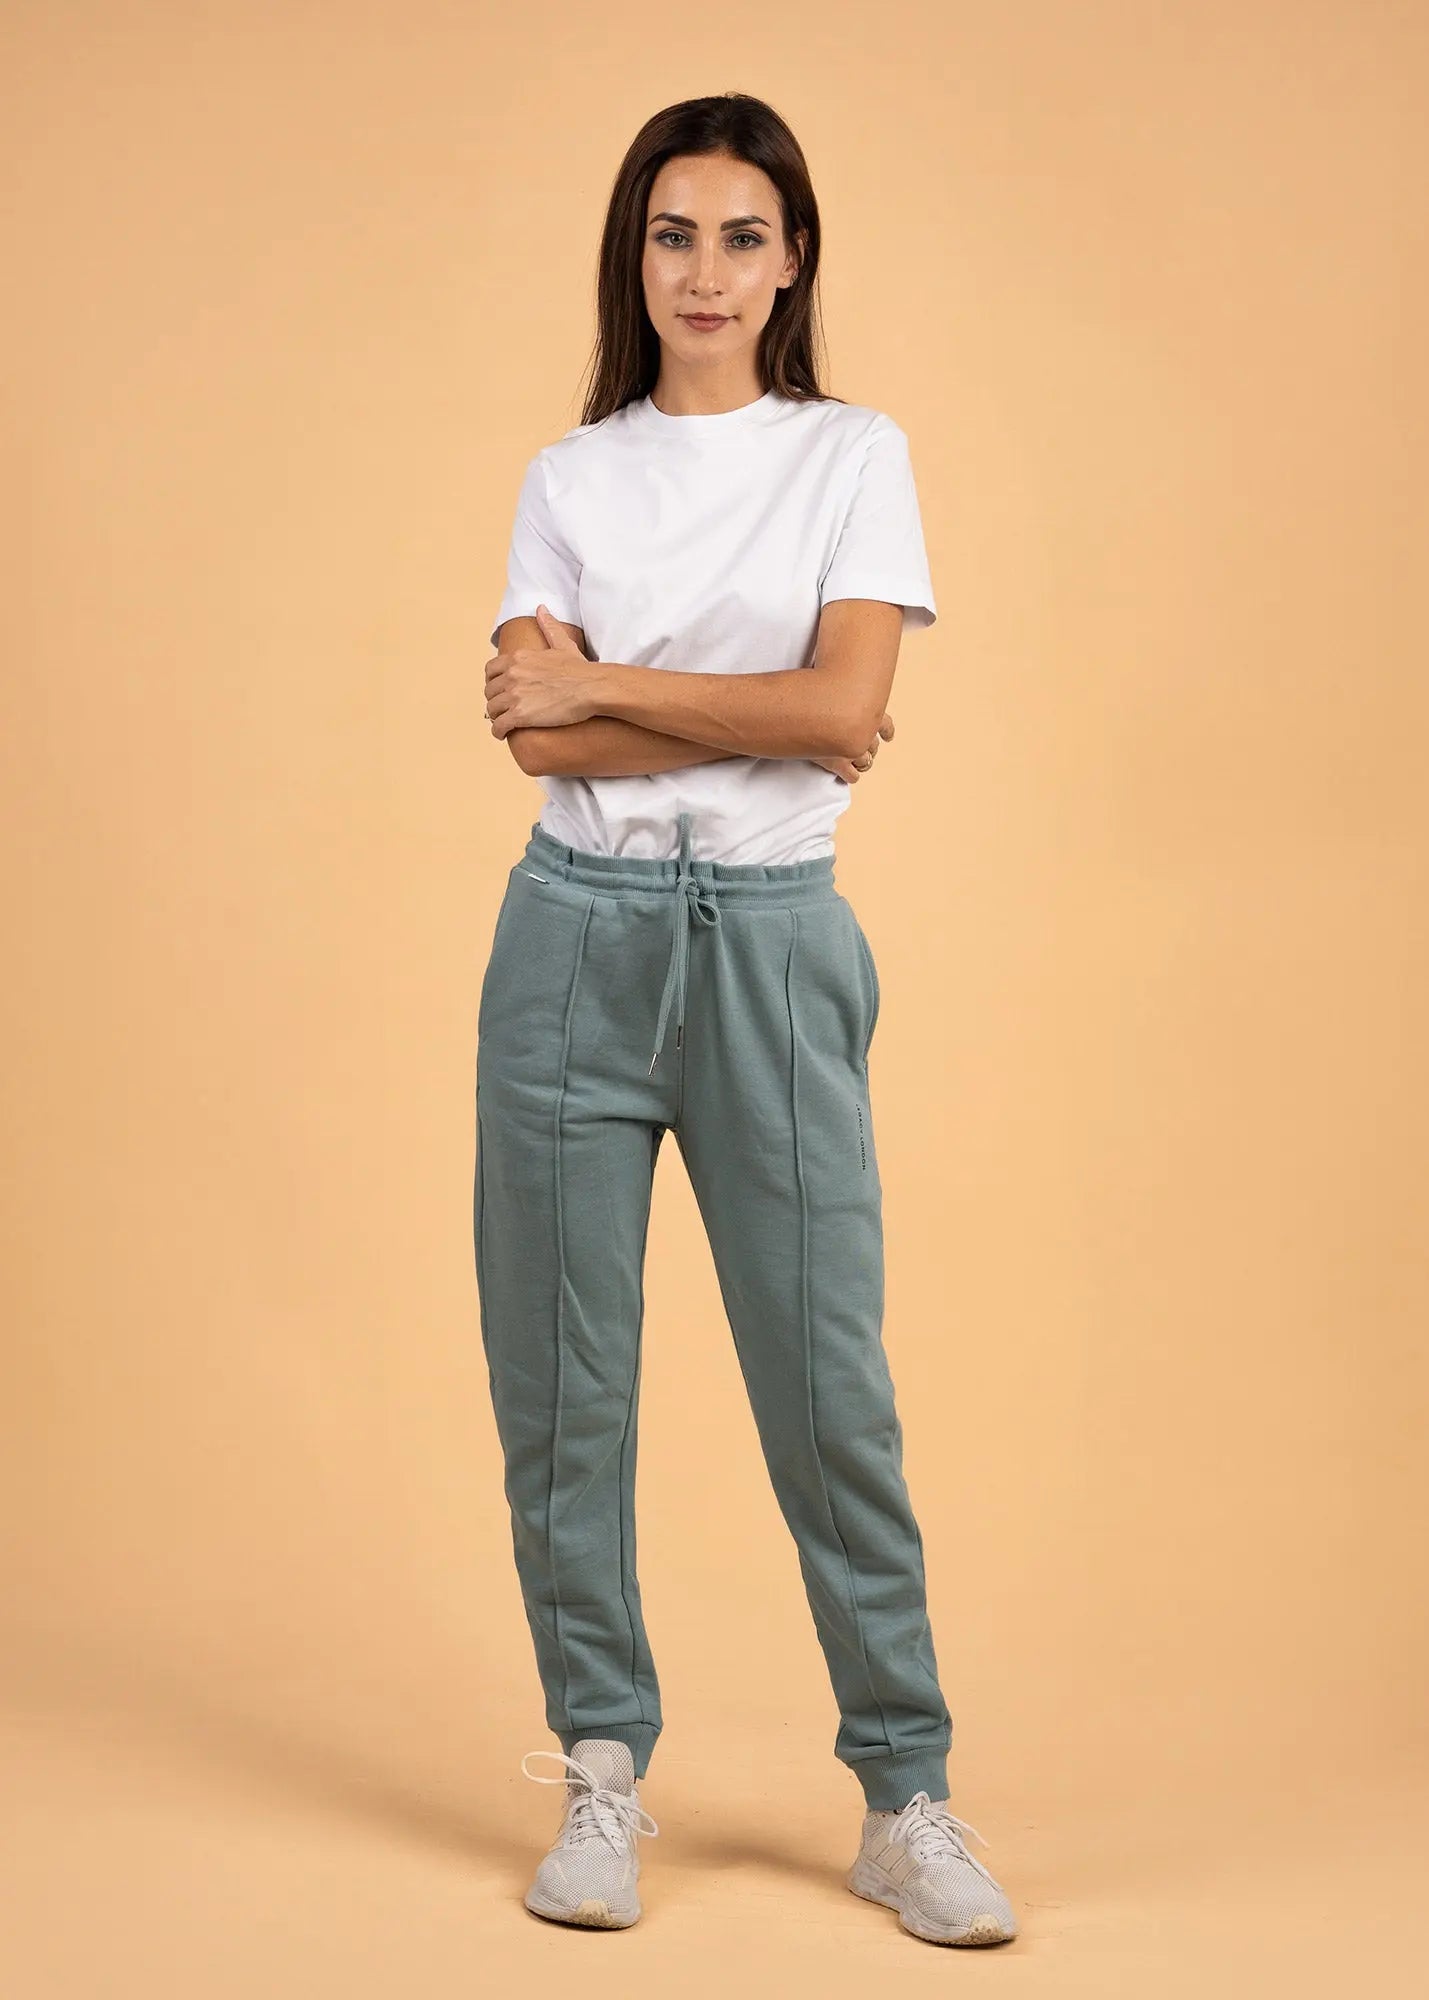 Unisex Tailored Joggers | LCY London - LCY LONDON